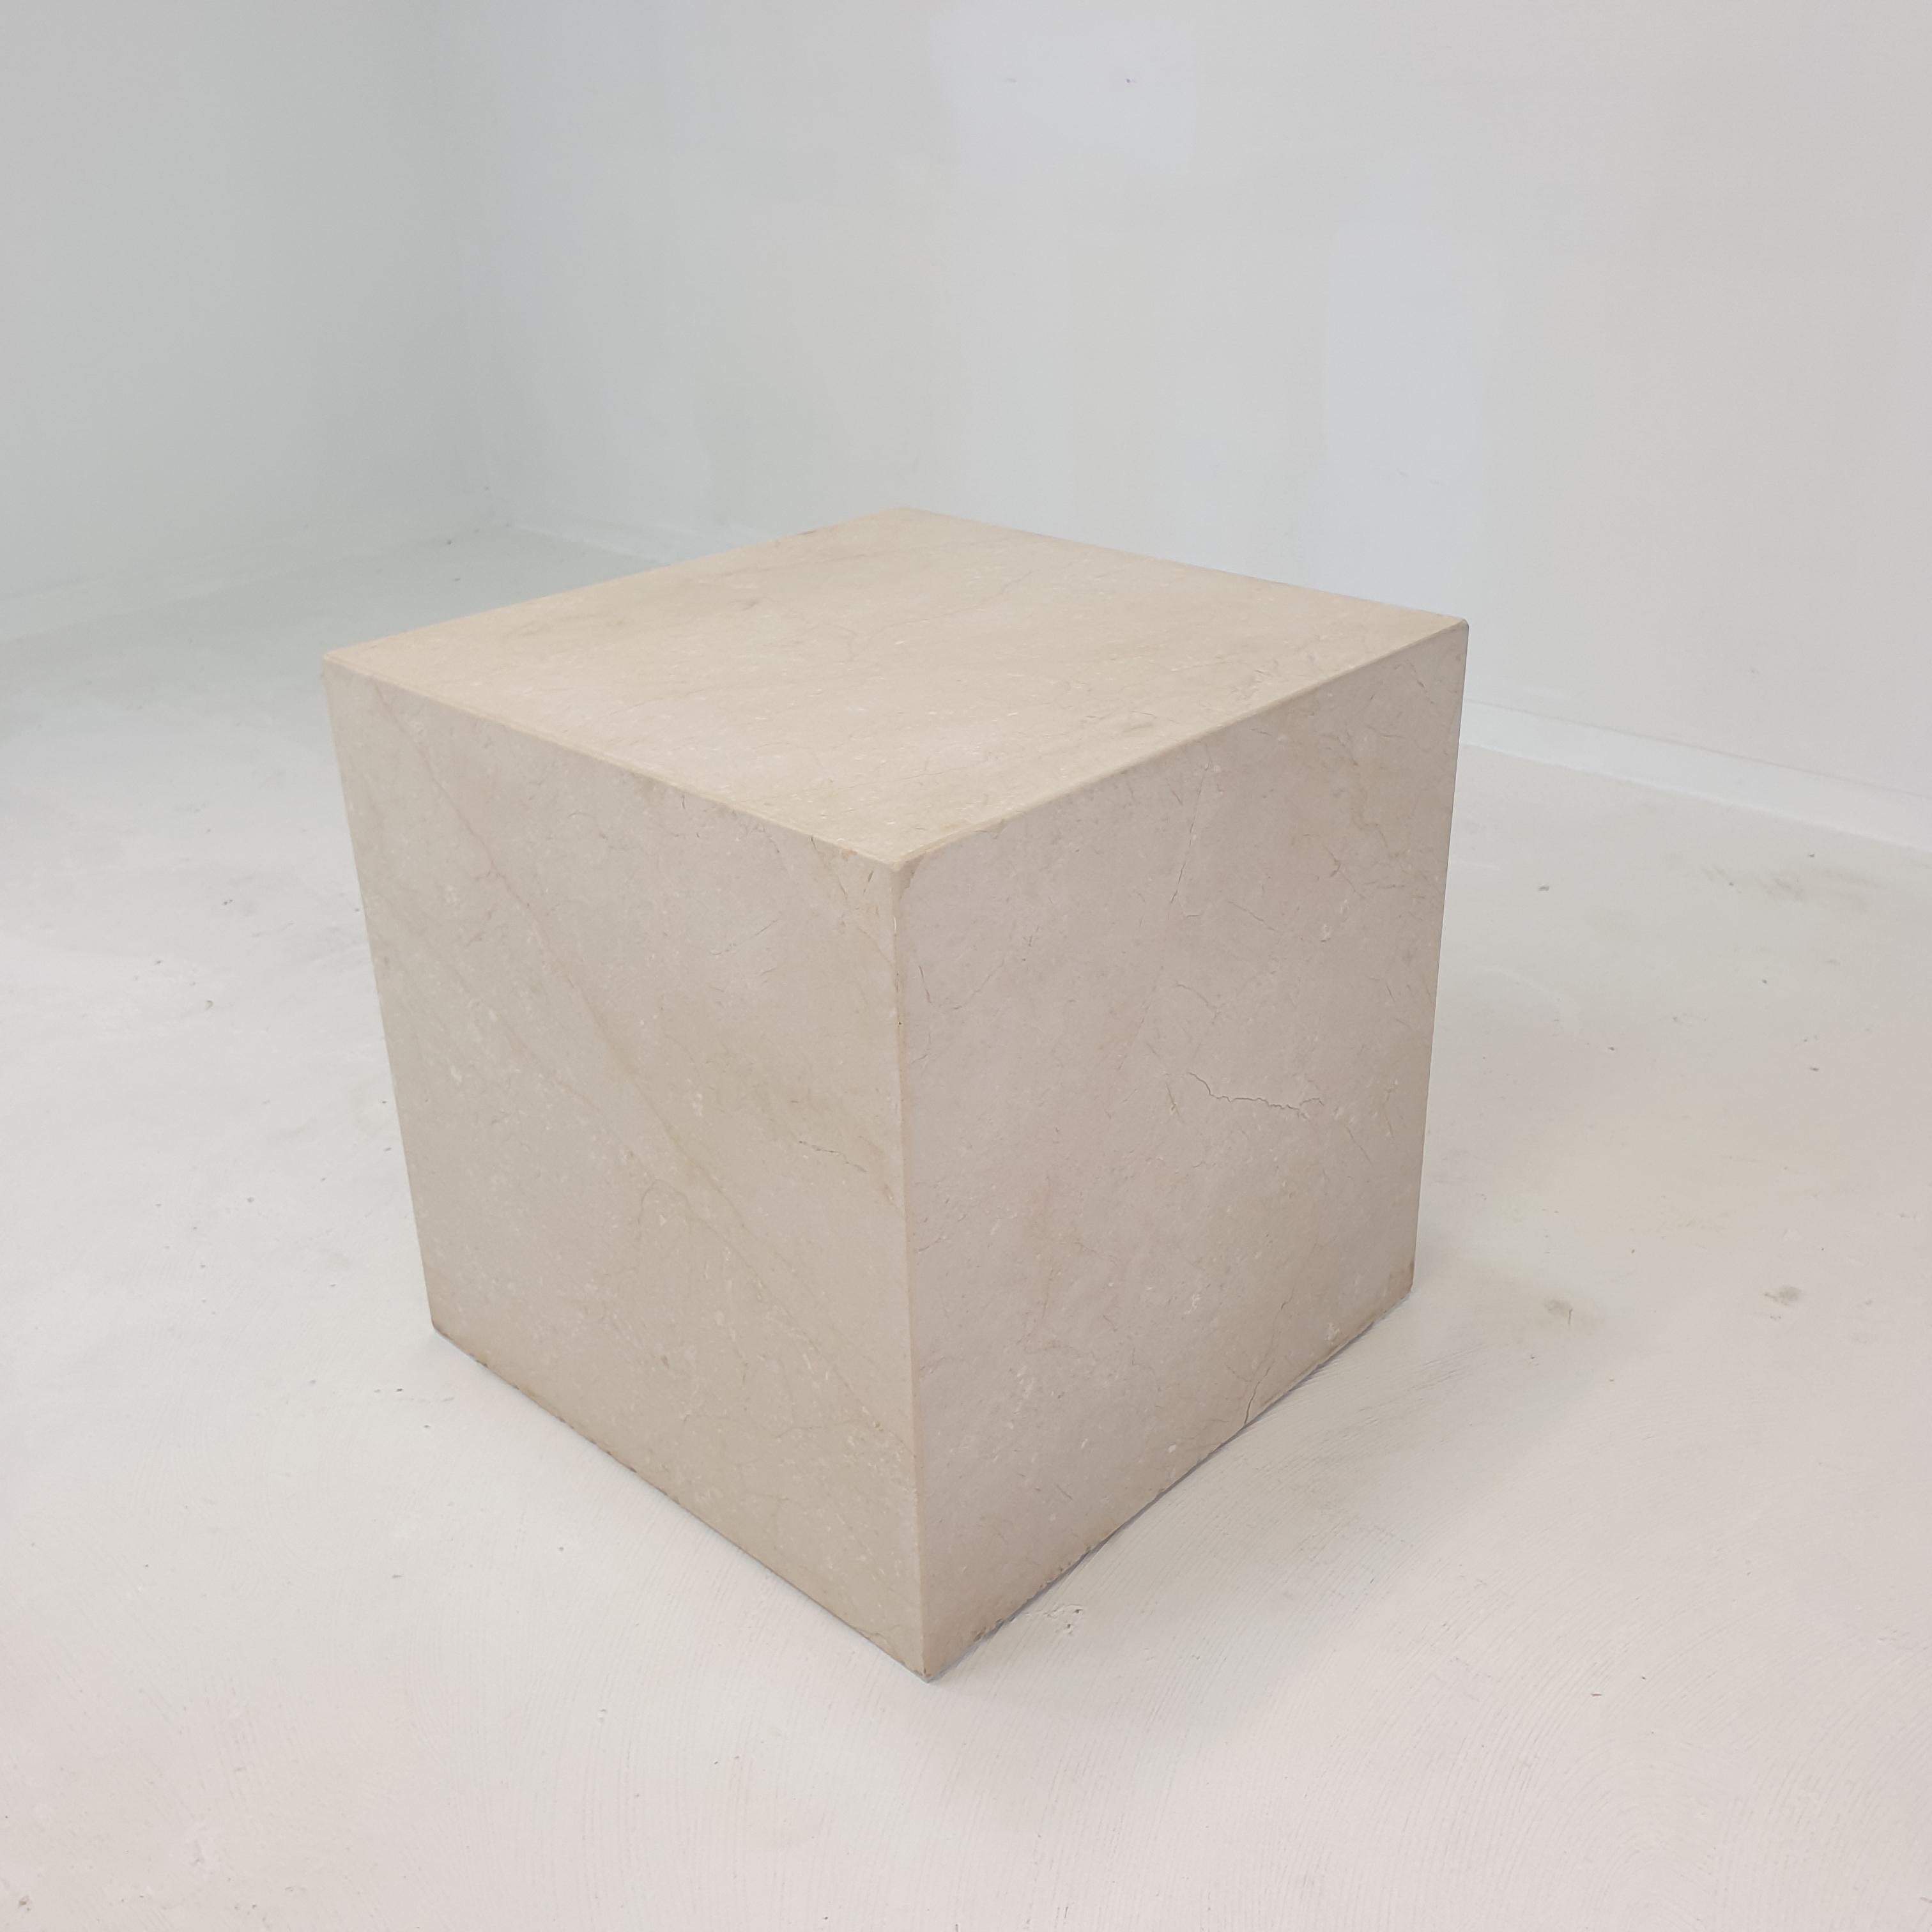 Italian Travertine Pedestal or Side Table, 1980's For Sale 2